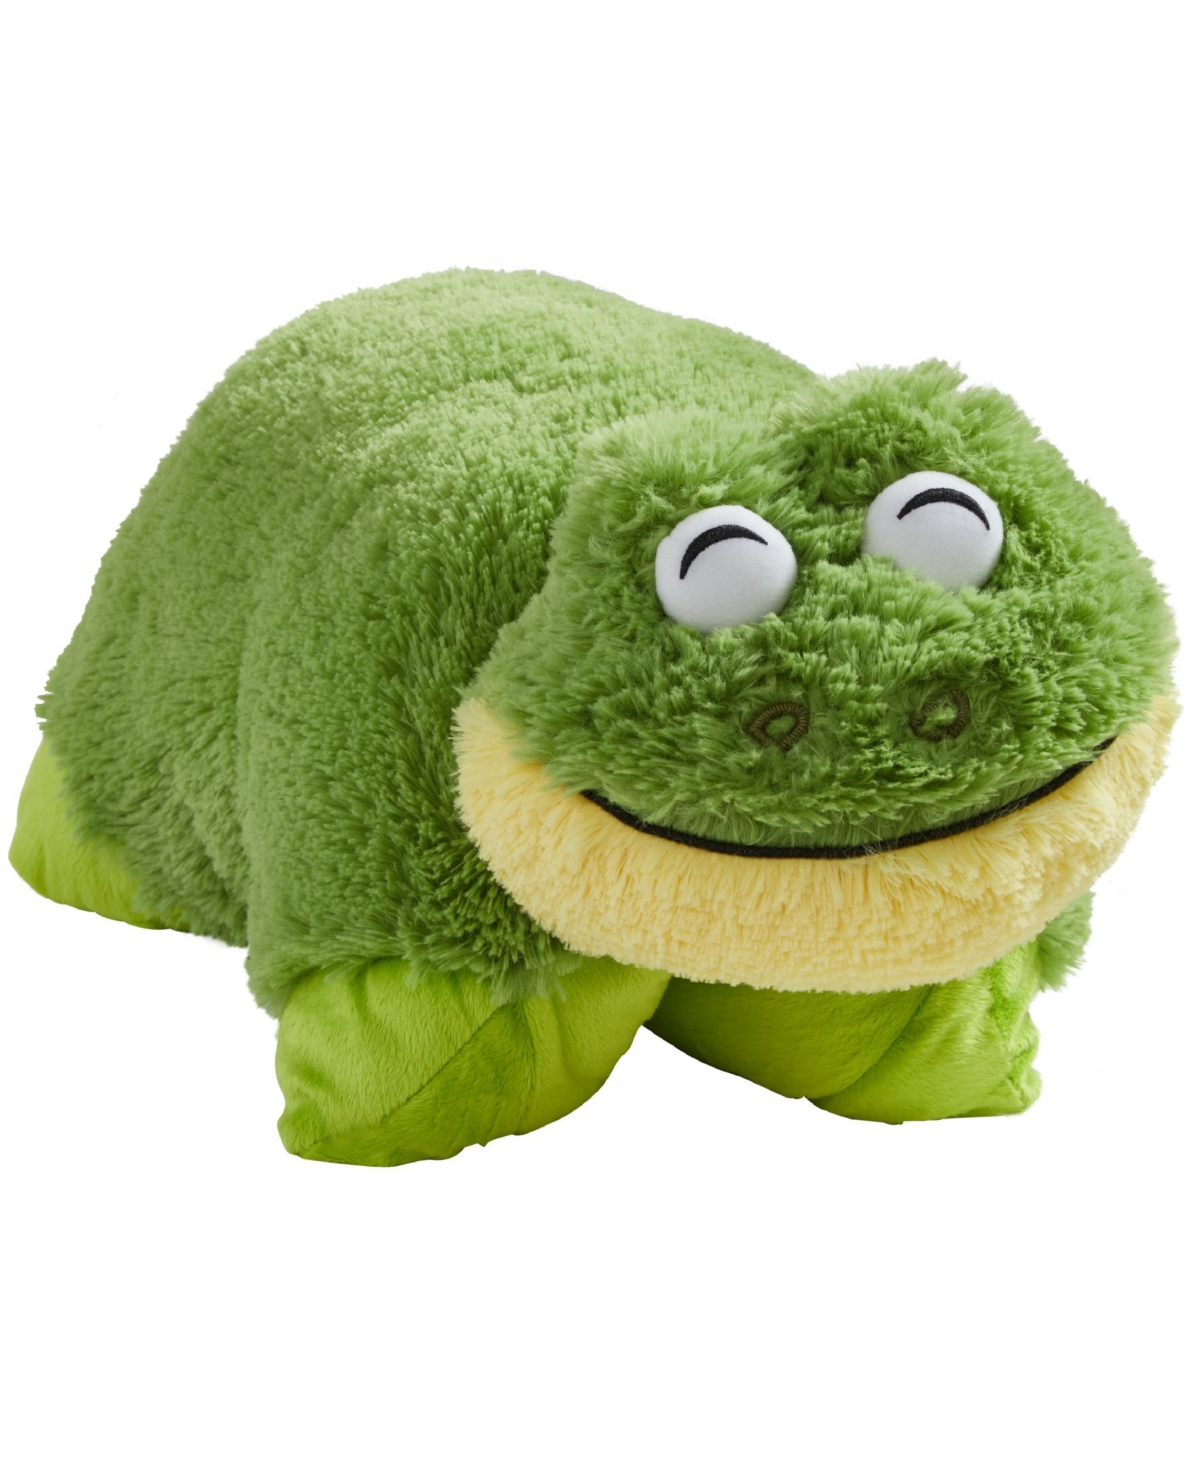 Pillow Pets Kids' Signature Friendly Frog Stuffed Animal Plush Toy In Green